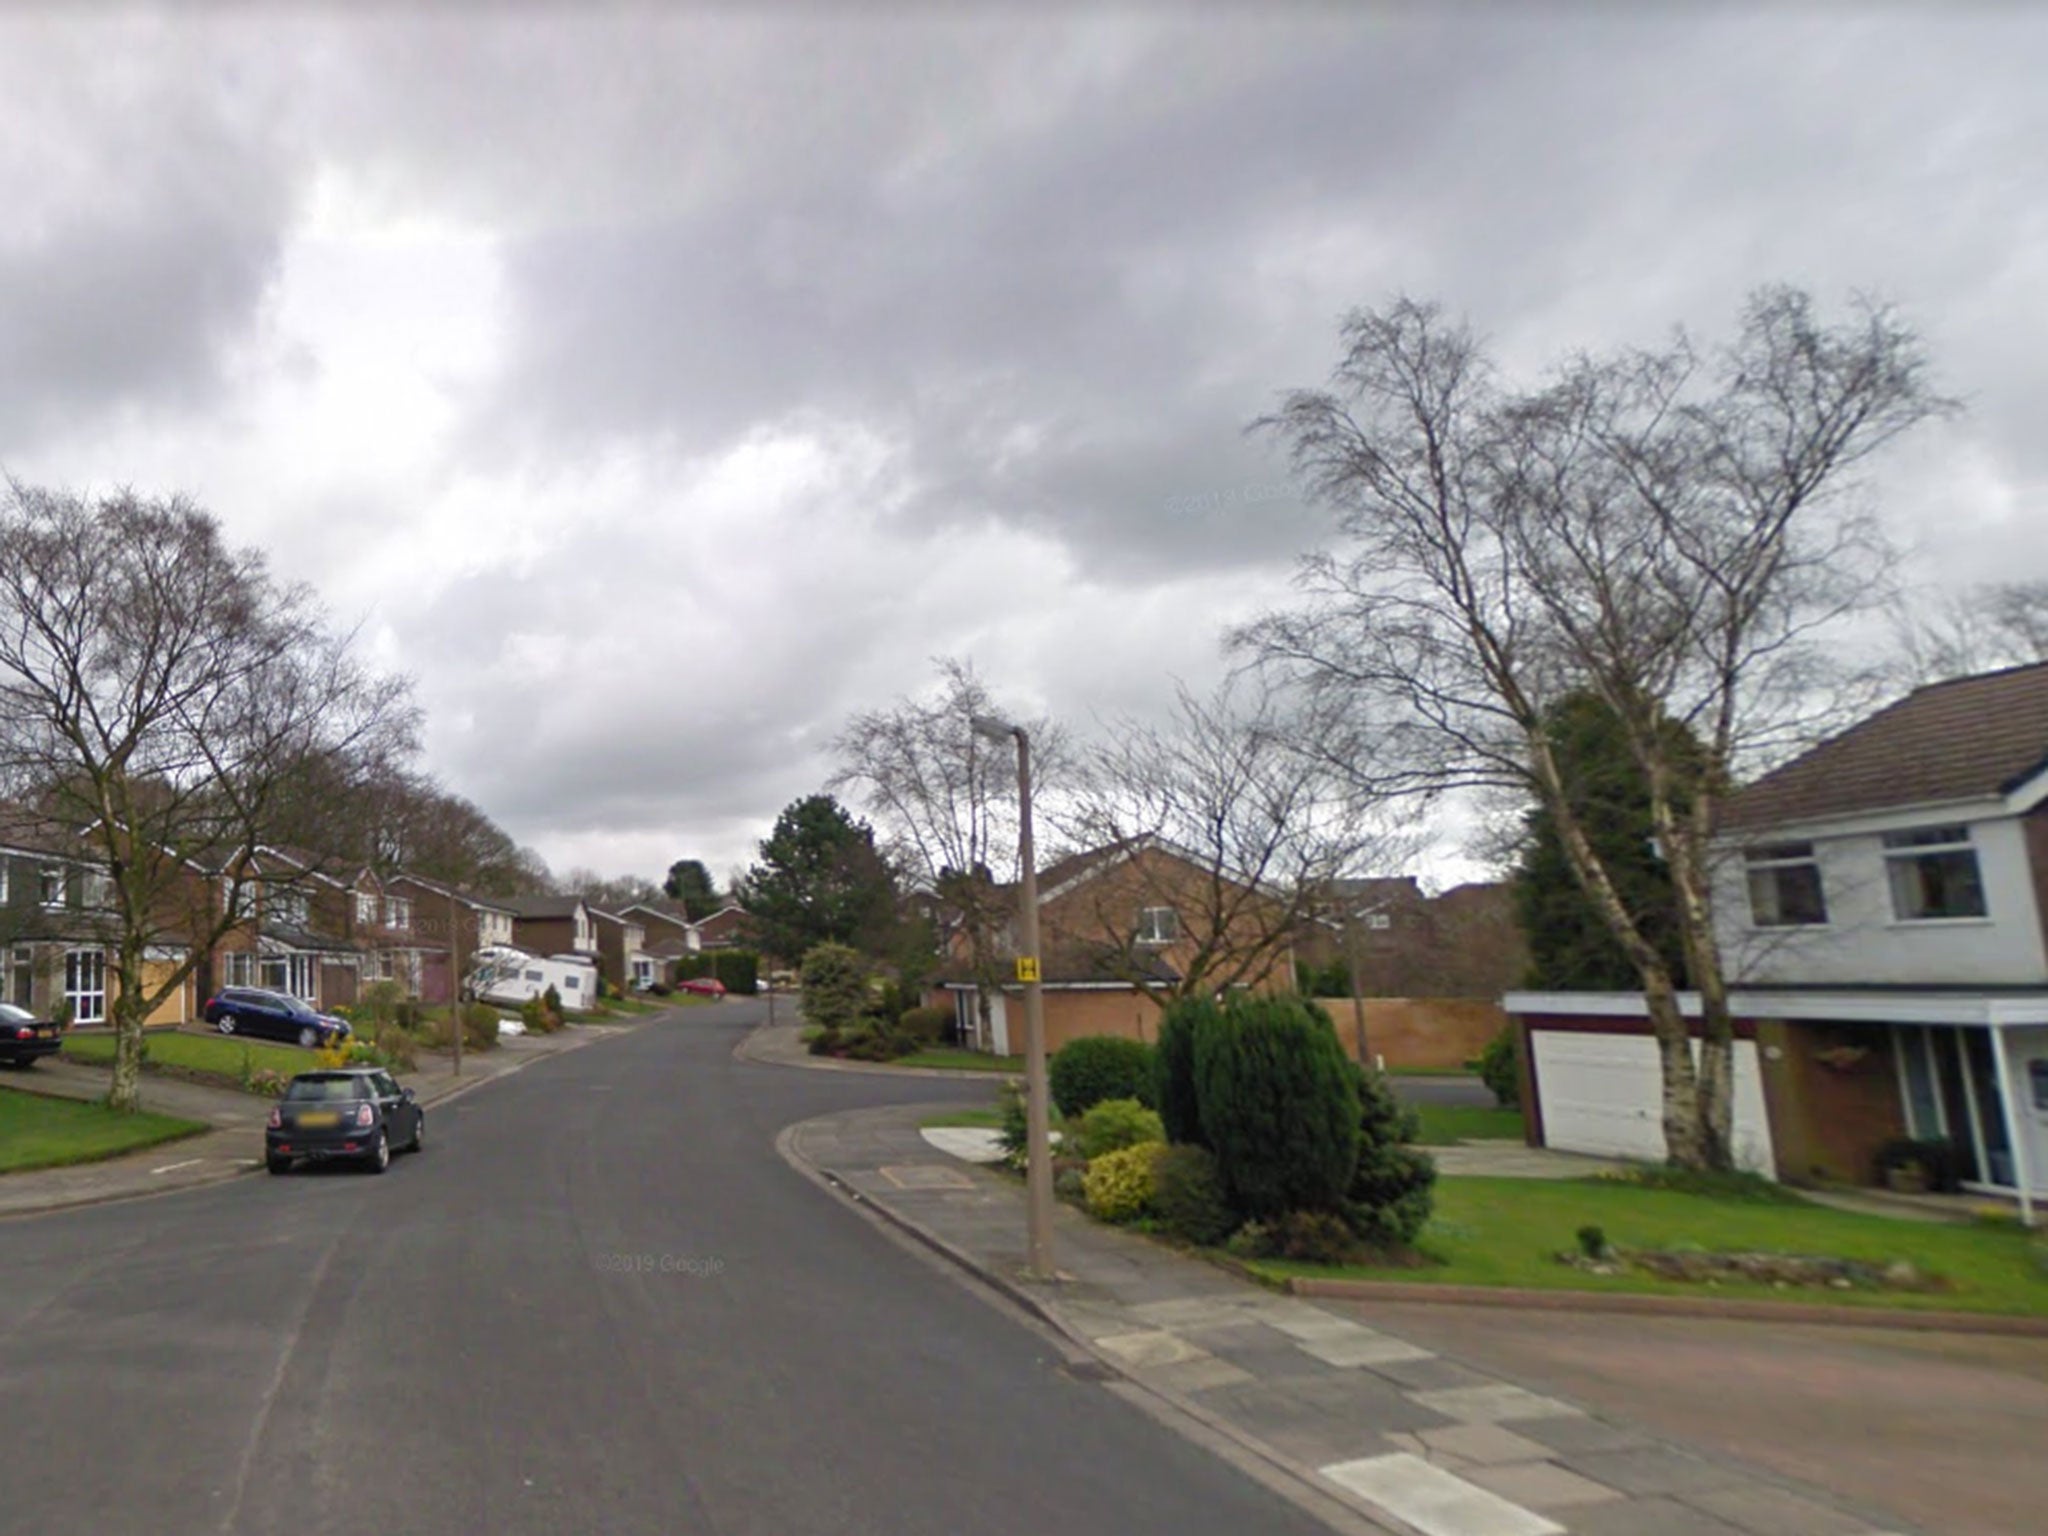 The woman was attacked at her home in Purbeck Drive, Bolton